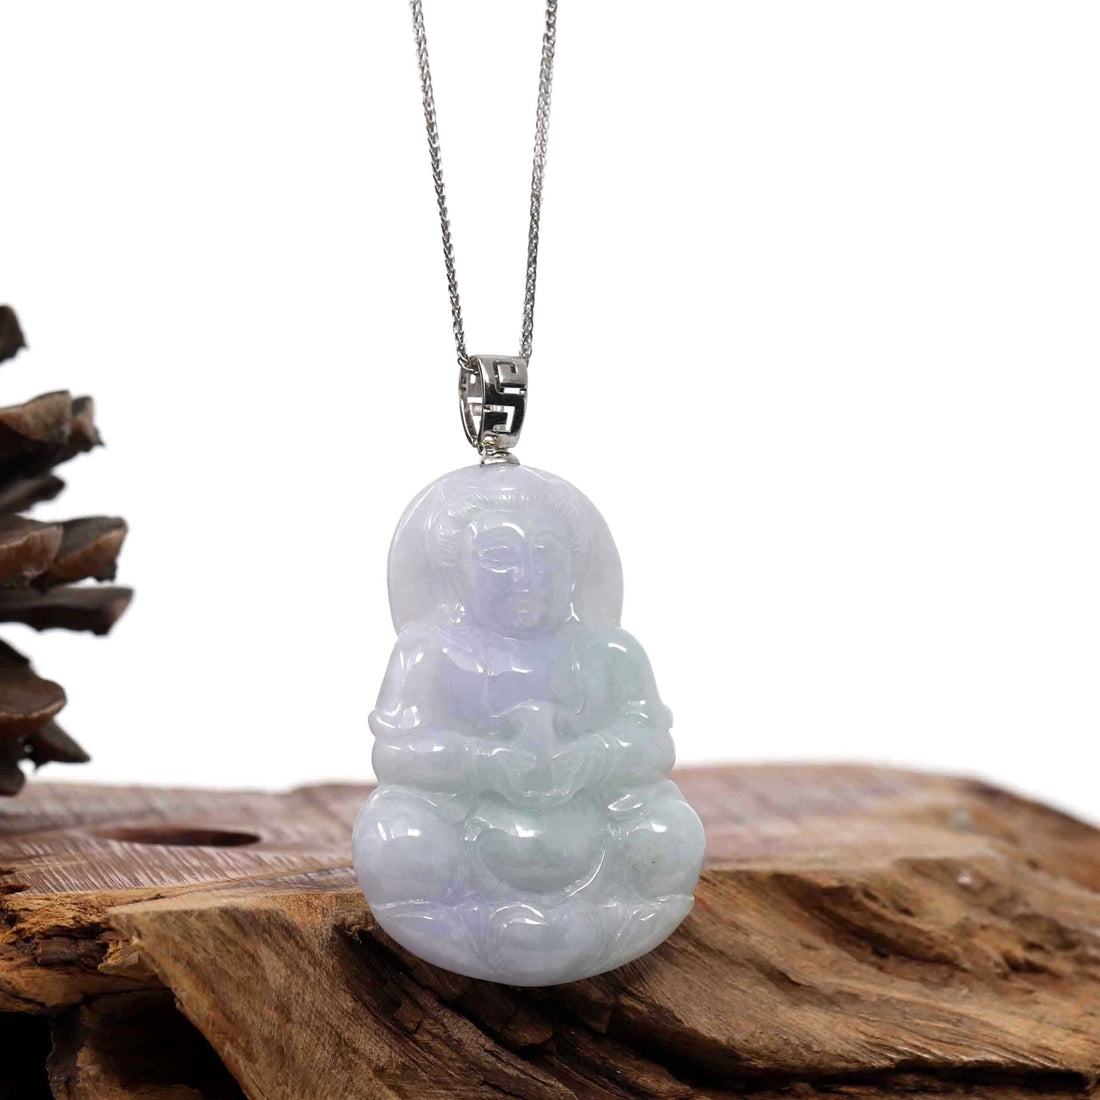 Baikalla Jewelry Jade Guanyin Pendant Necklace Copy of "Goddess of Compassion" Sterling Silver Genuine Burmese Jadeite Jade Guanyin Necklace With Good Luck Design